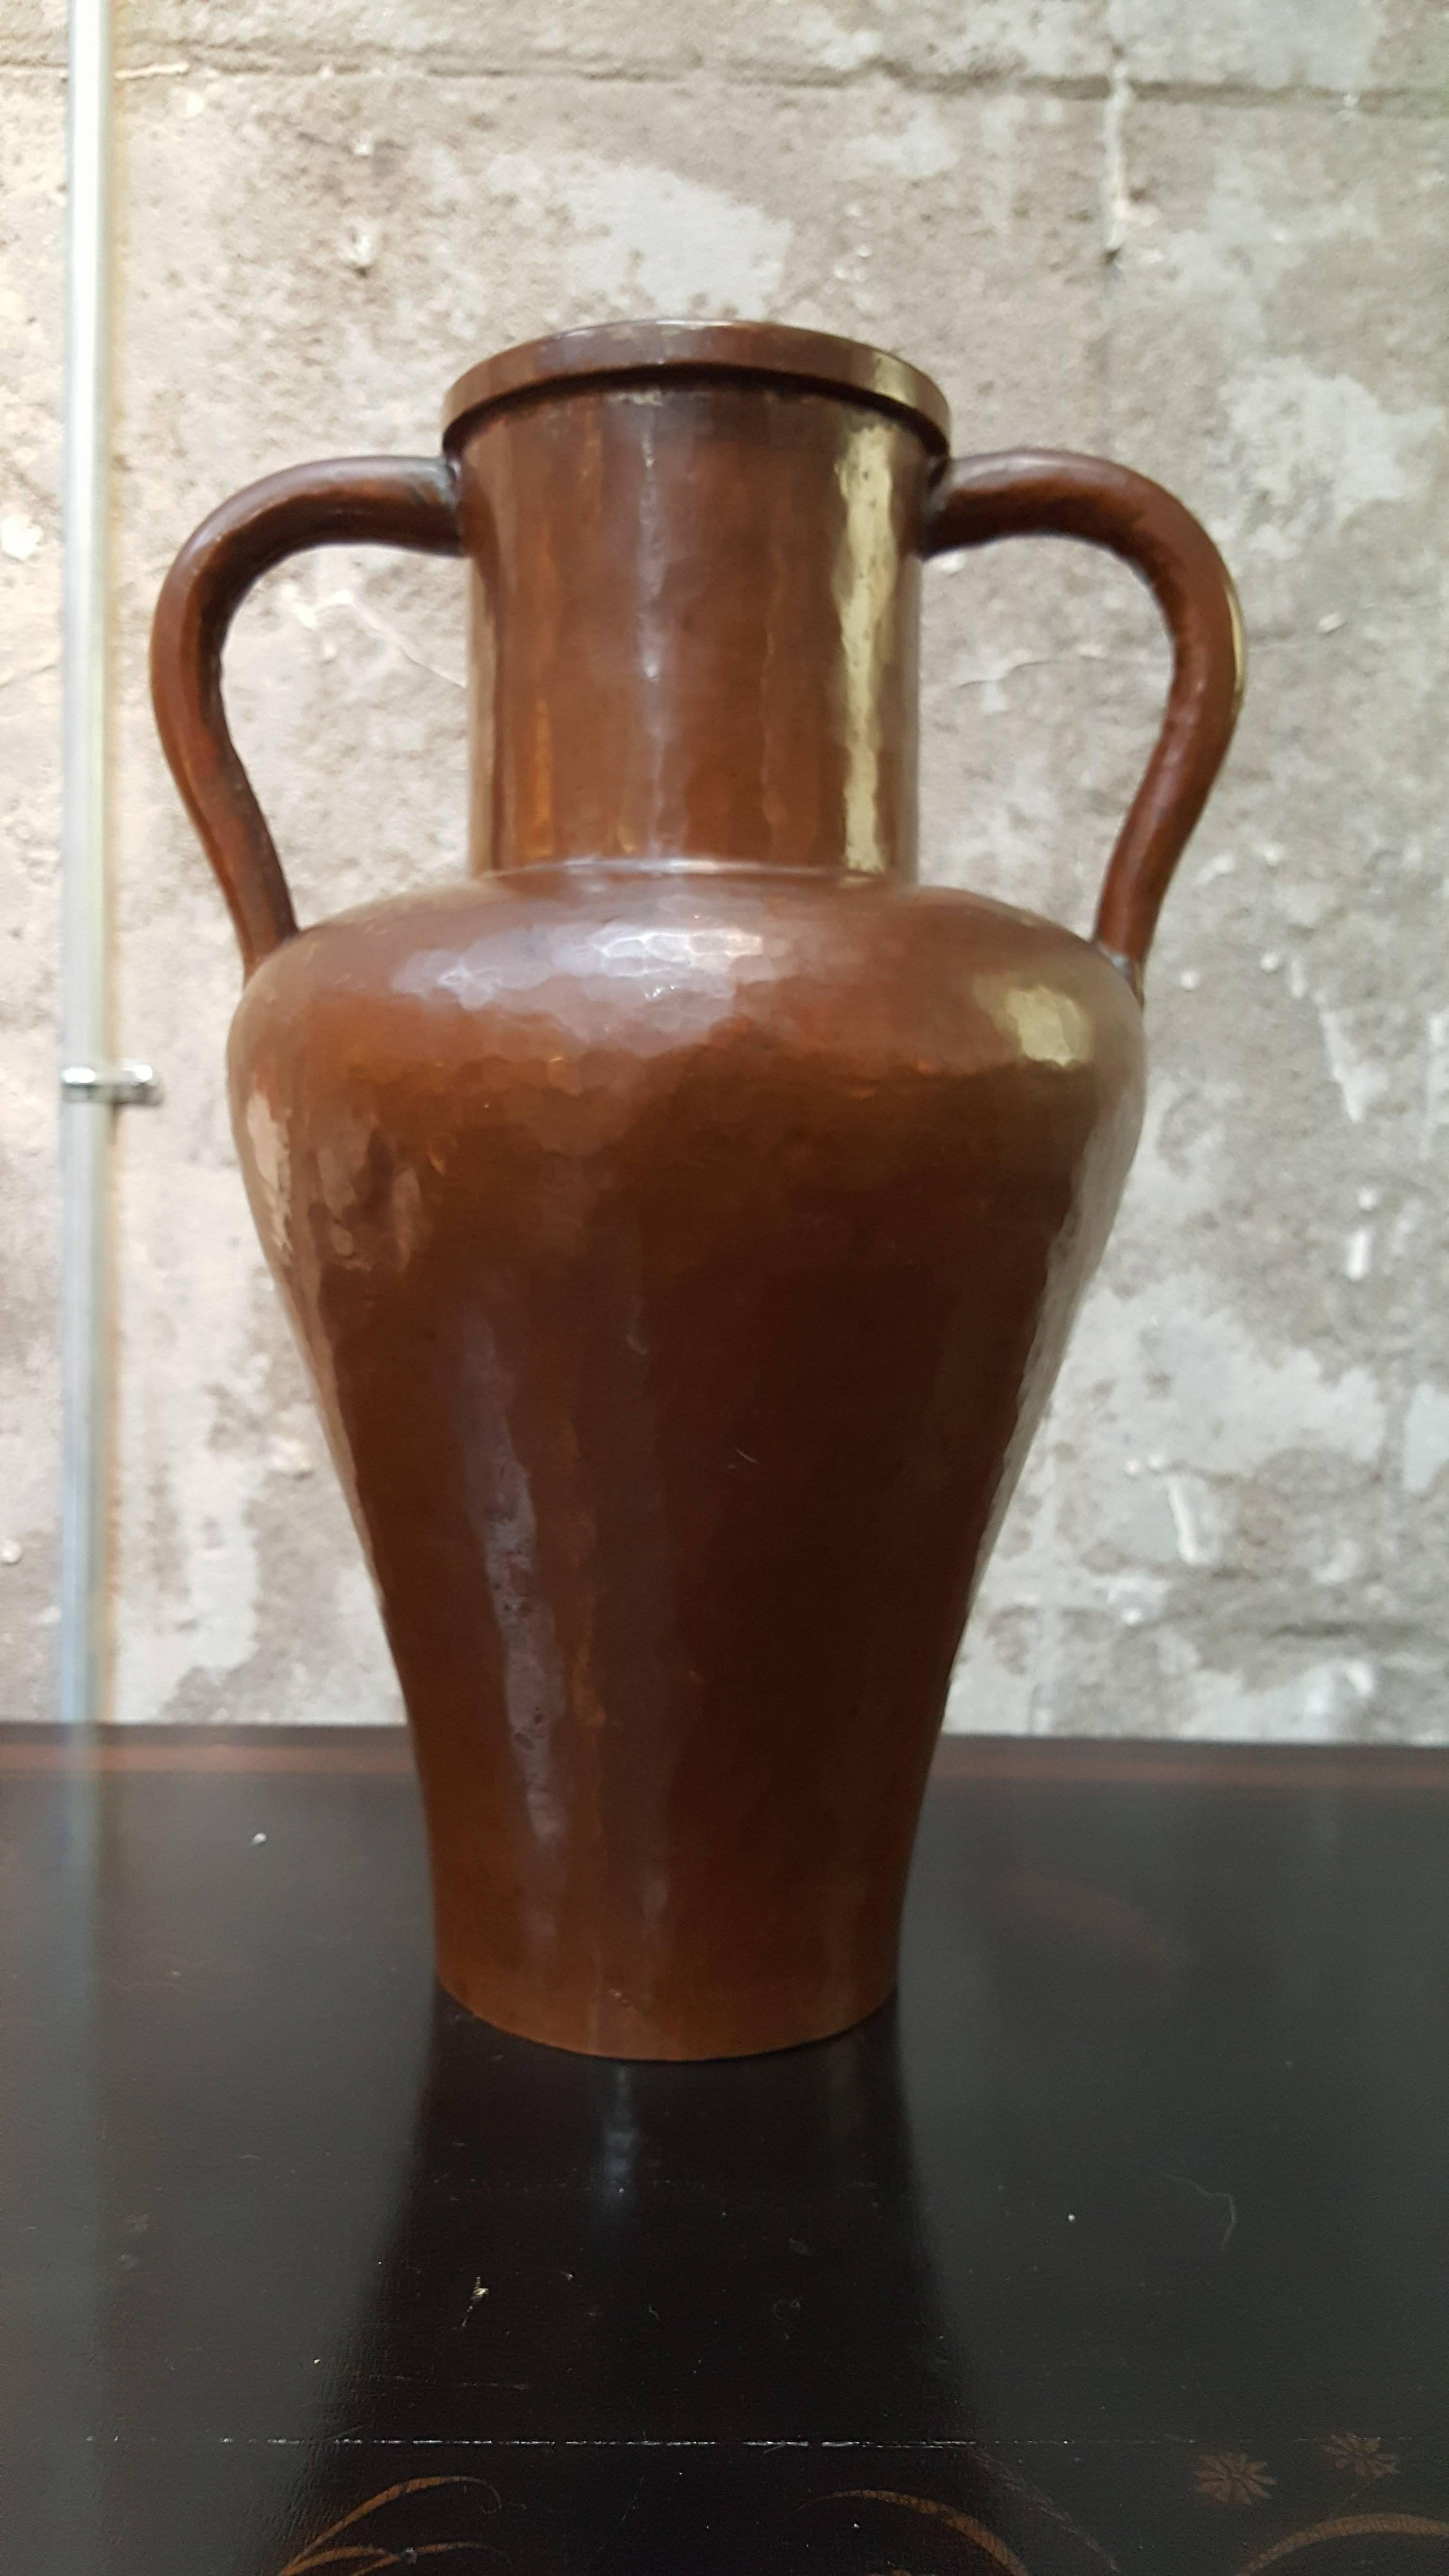 Early 1900s Arts & Crafts hand-hammered copper amphora vase. Precise and highly skilful hammered technique and craftsmanship, original finish with deep, rich, original patina. Signed on base. Unknown artist.